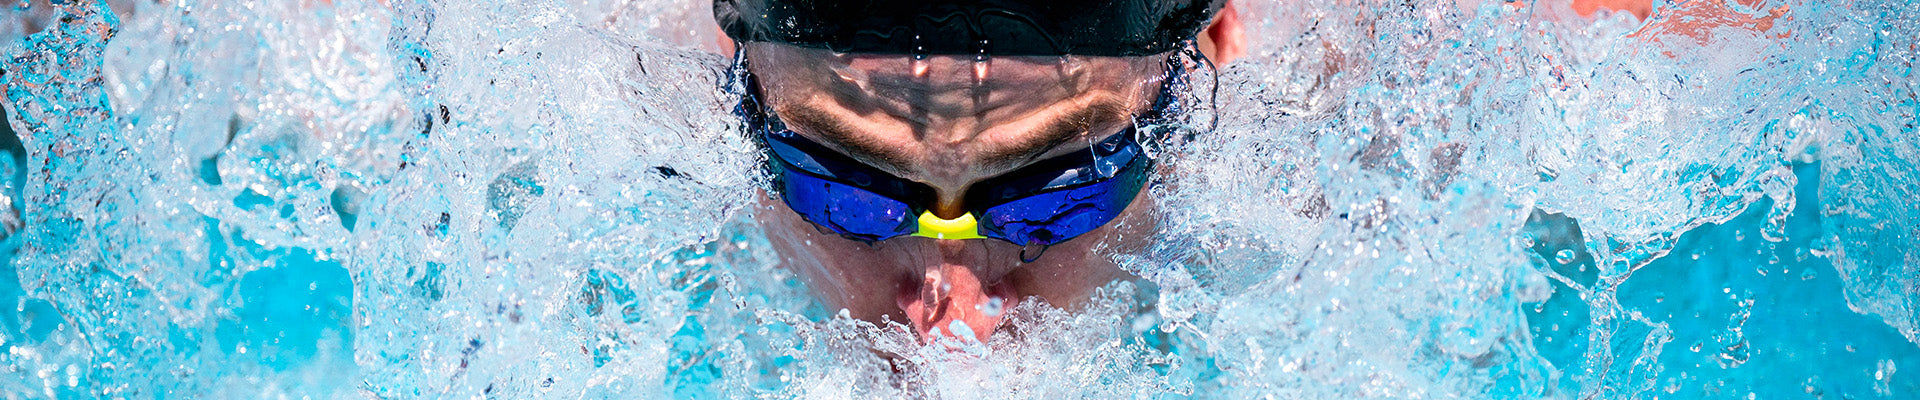 Swim Goggles for Performance Swimmers